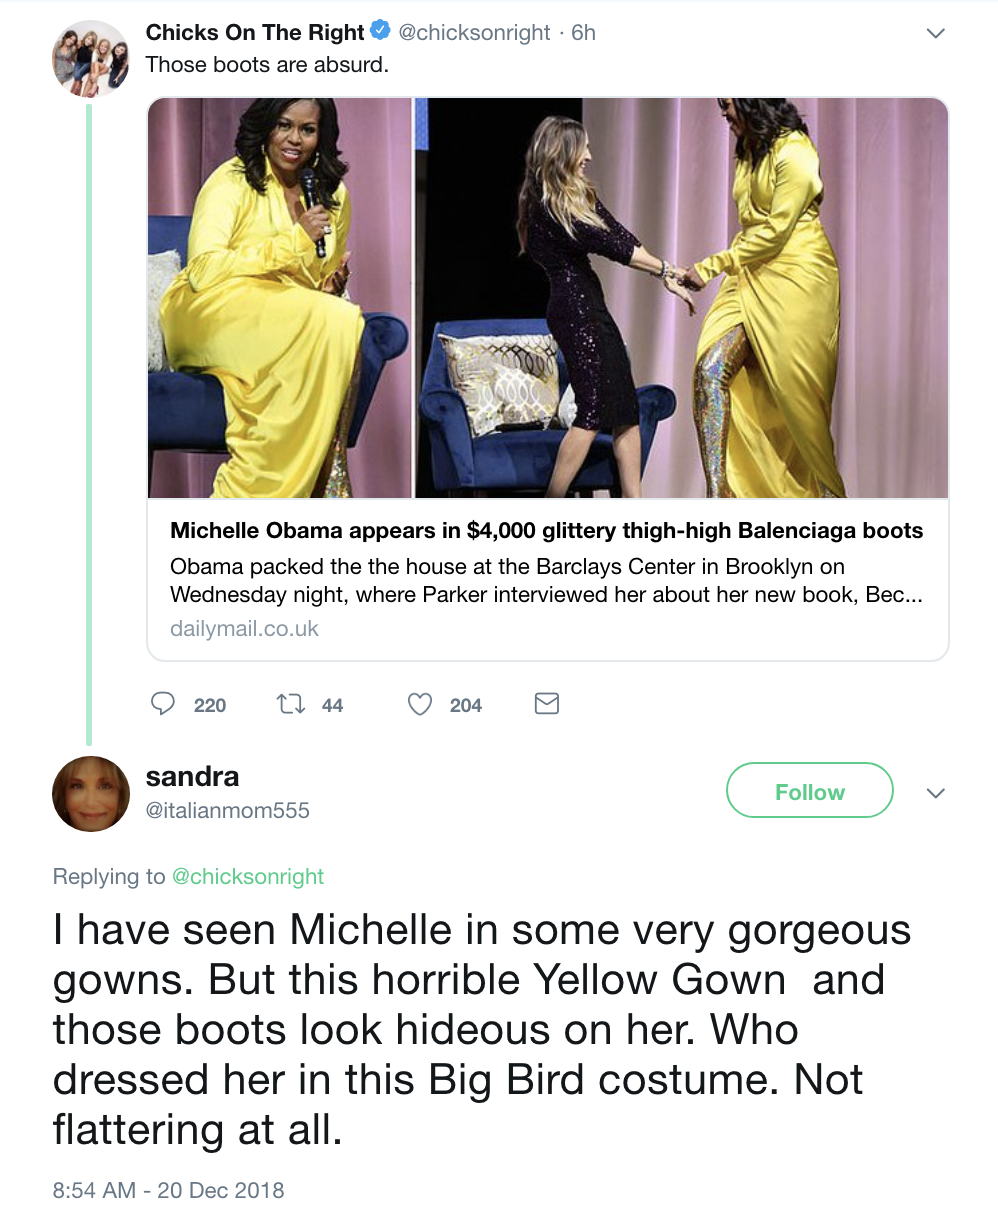 Screen-Shot-2018-12-20-at-11.48.43-AM Michelle Obama's New Shoes Have Republicans Going Off The Rails (IMAGES) Celebrities Politics Social Media Top Stories 